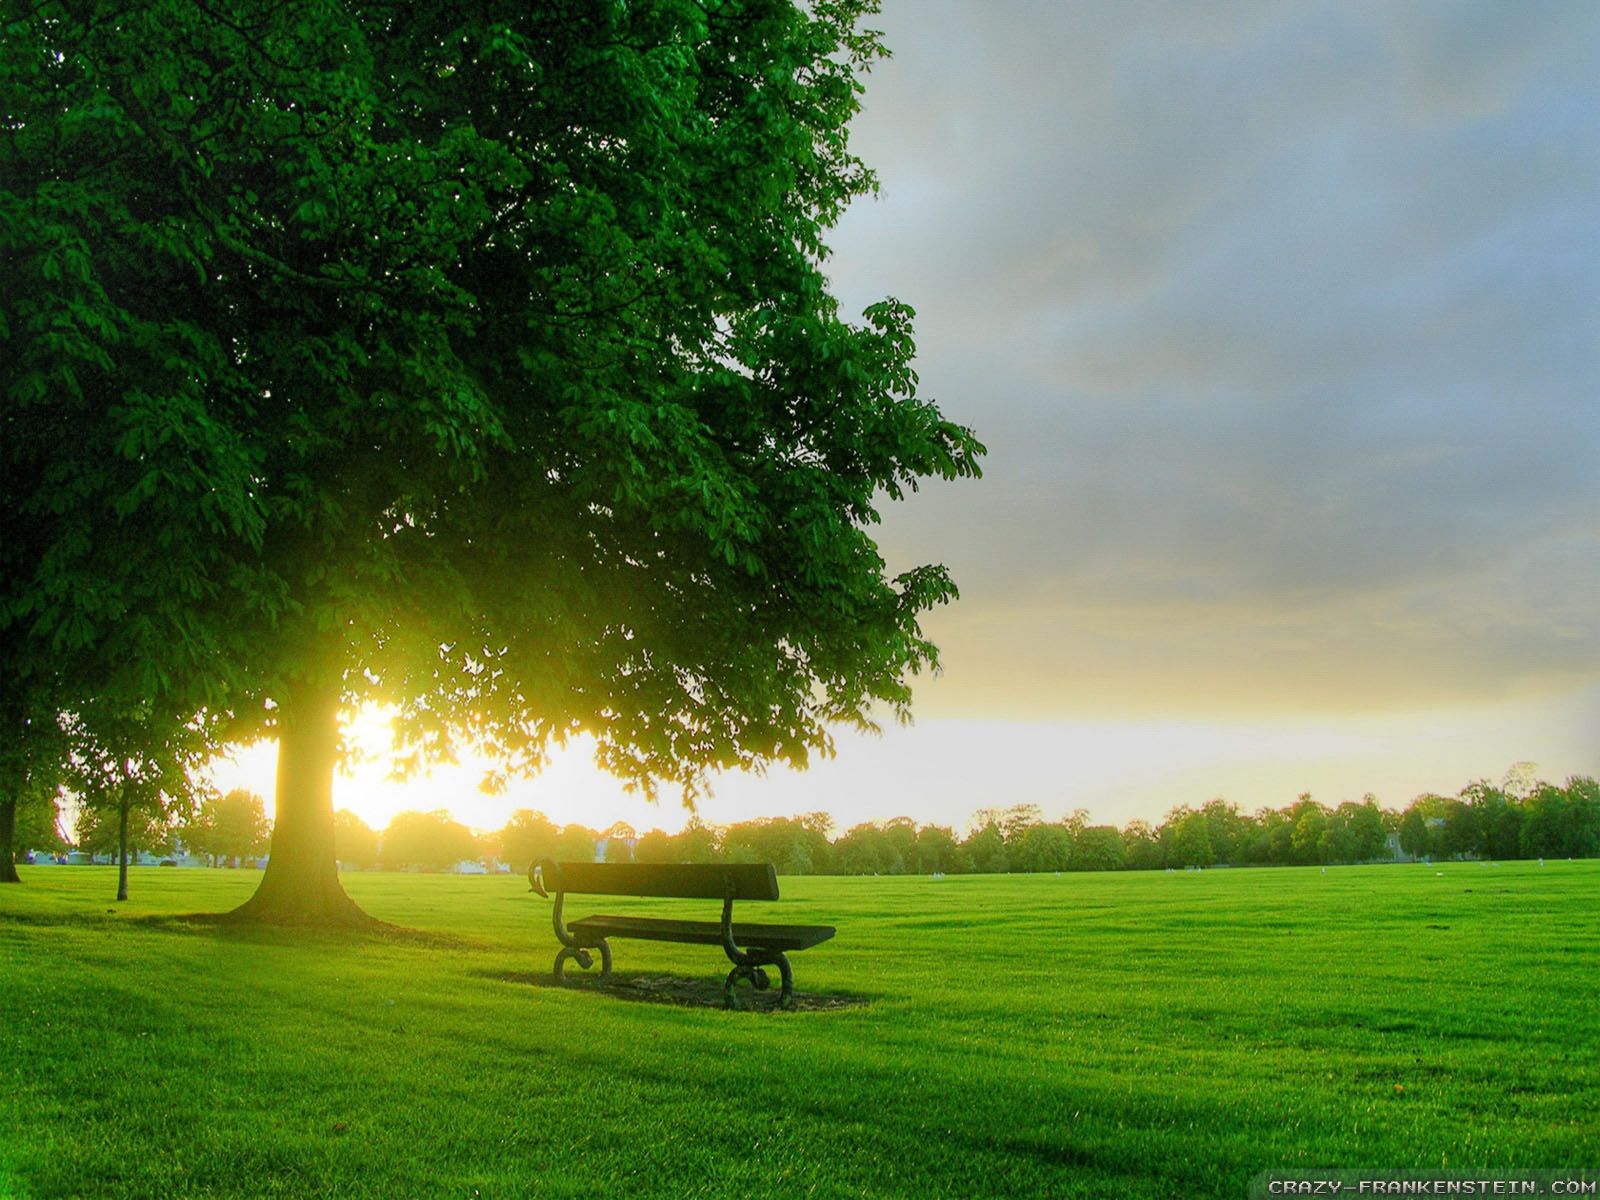 apus wallpapers hd,natural landscape,green,nature,sky,bench